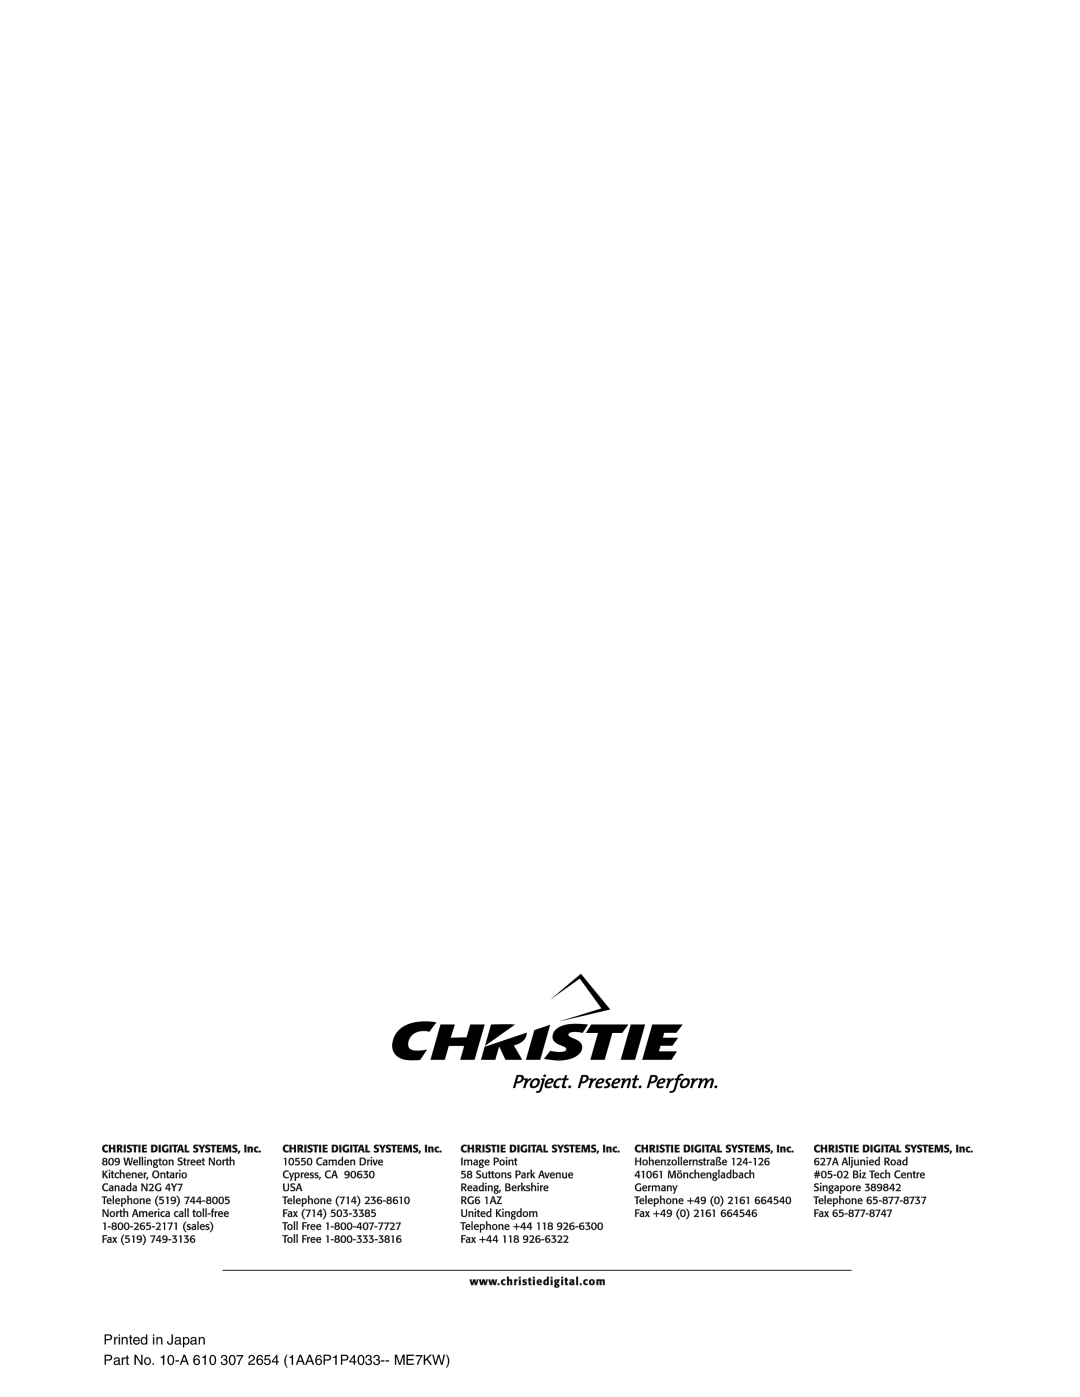 Christie Digital Systems 38-MX2001-01 user manual Printed in Japan Part No. 10-A 610 307 2654 1AA6P1P4033-- ME7KW 